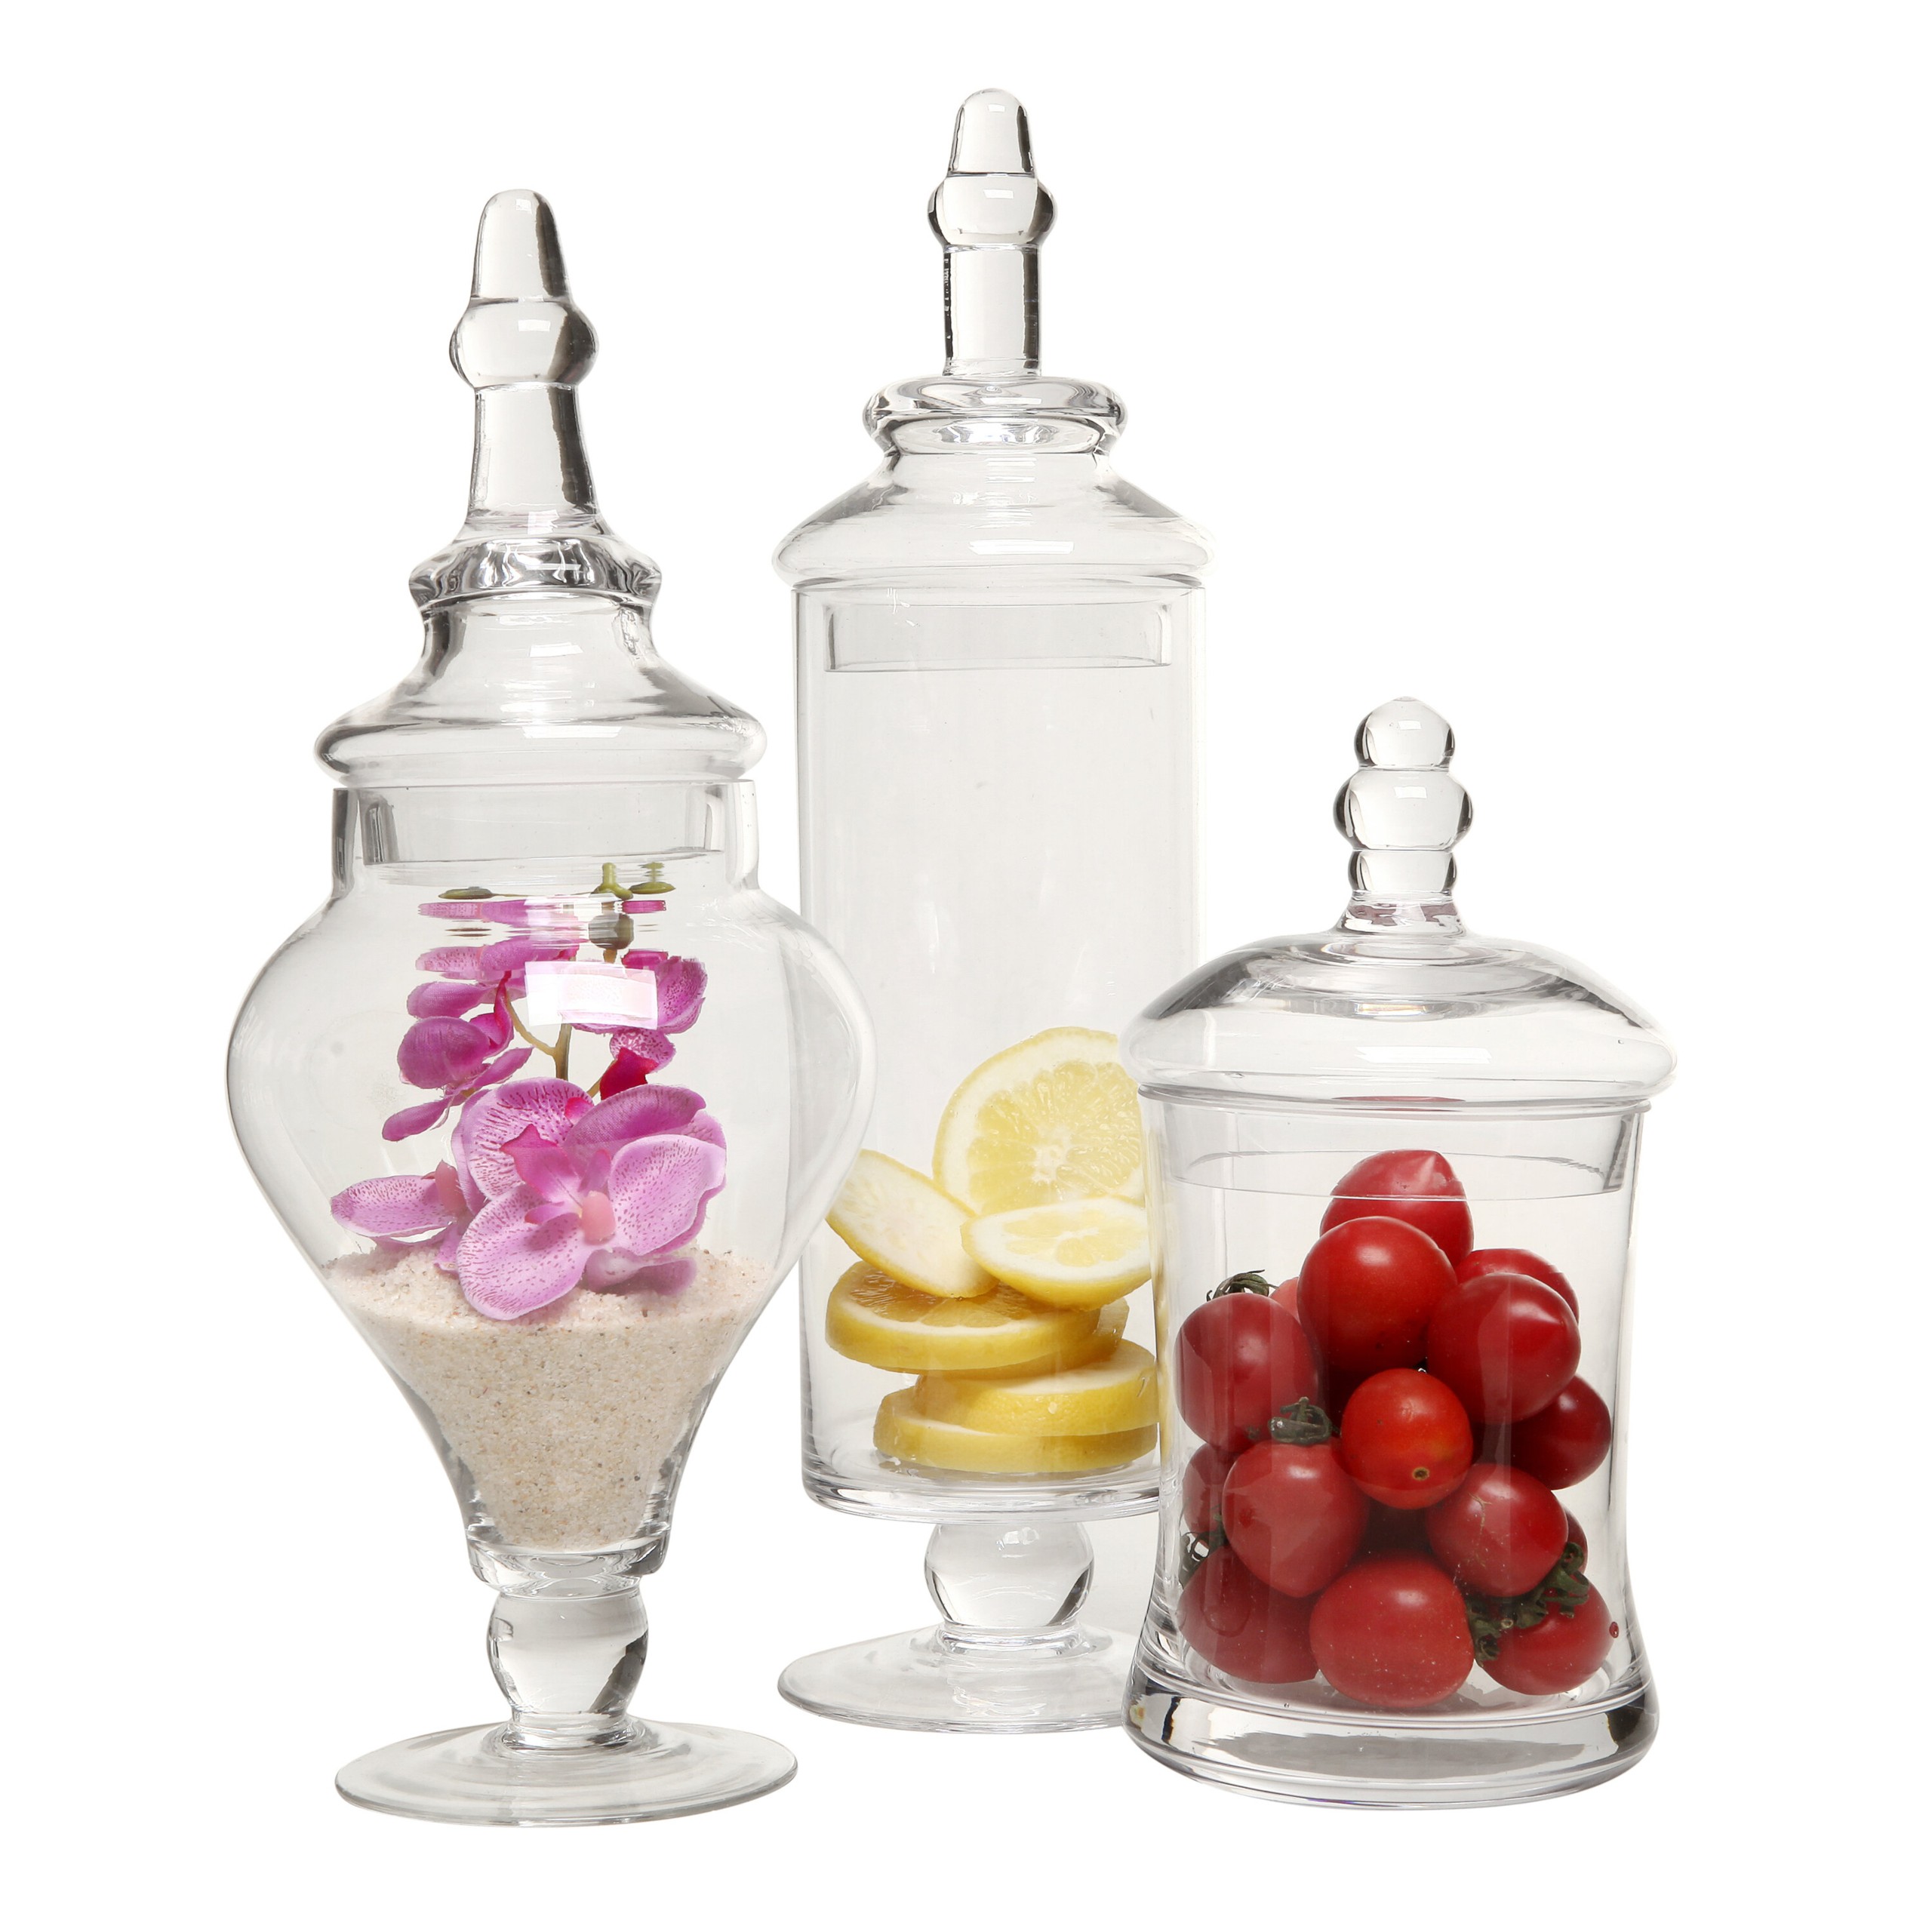 Designer Clear Glass Apothecary Jars (3 Piece Set) Decorative Weddings Candy Buffet - MyGift®